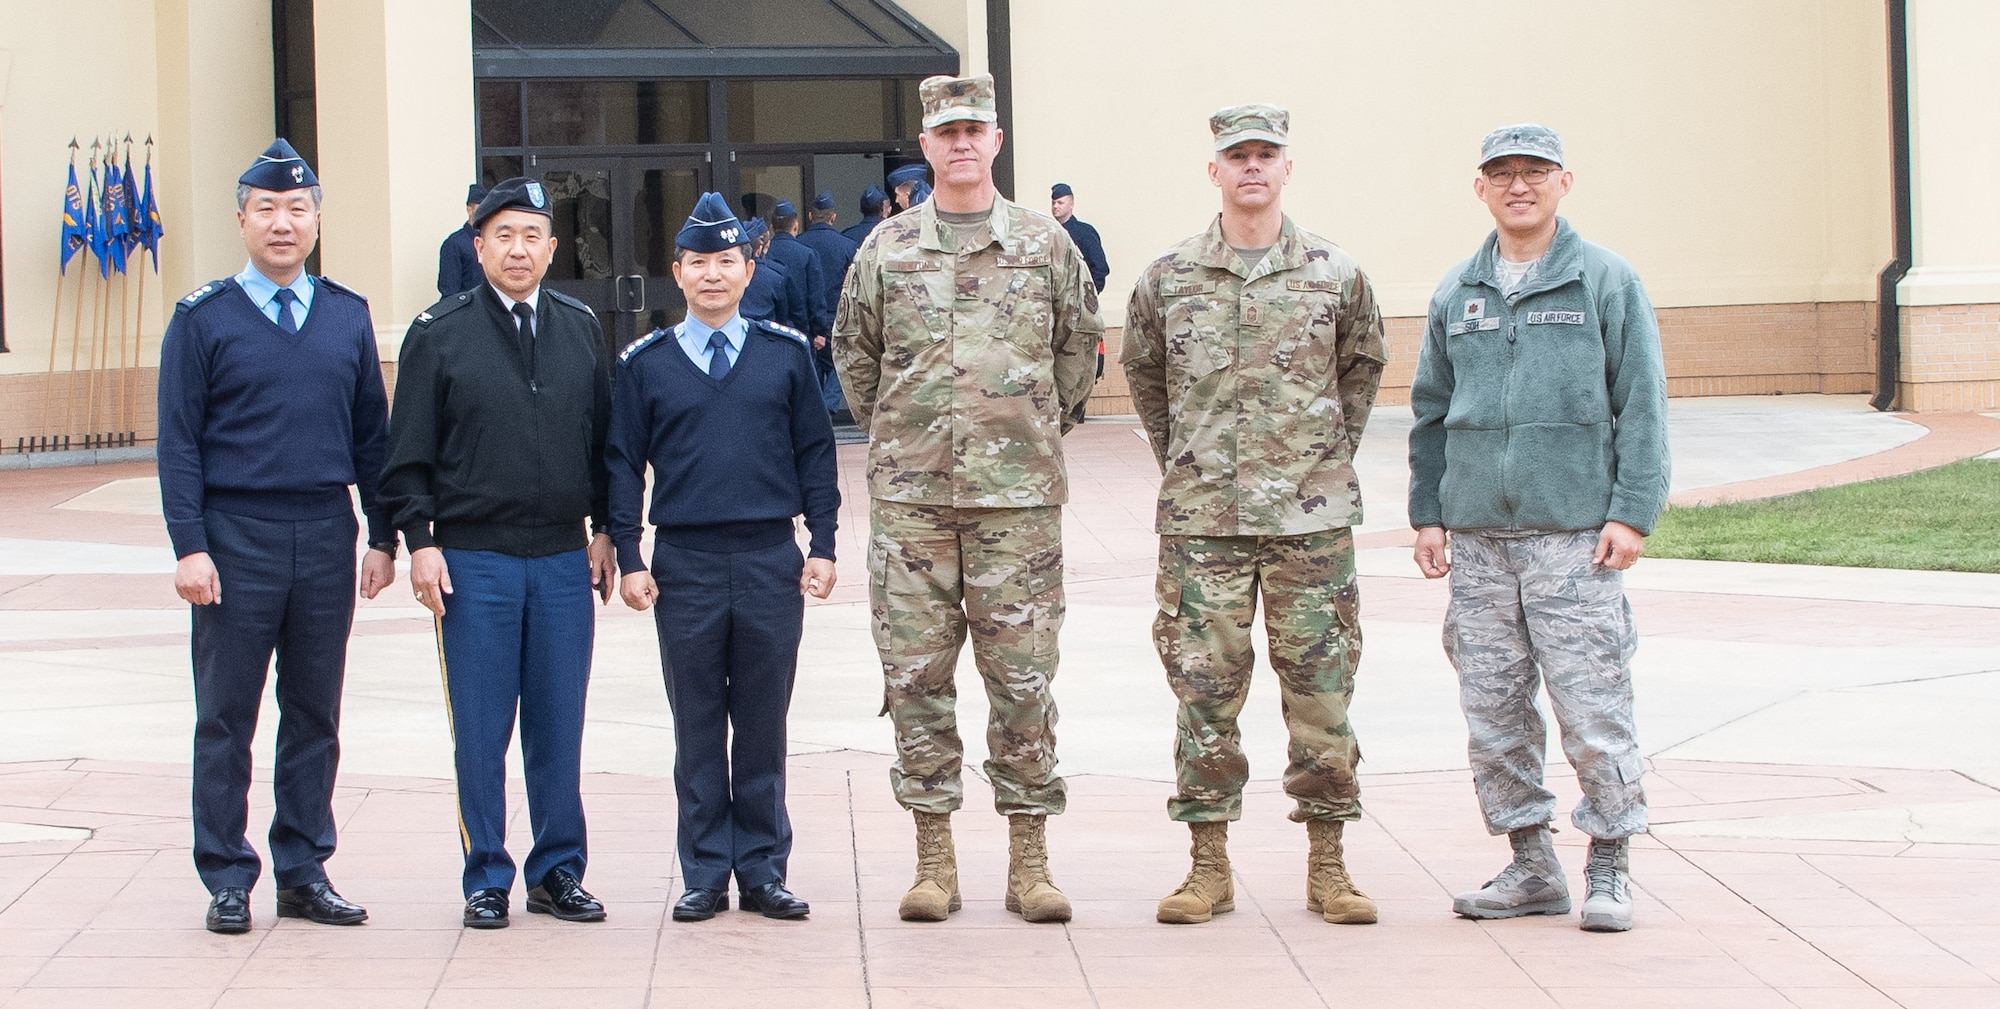 Chaplain, Lt. Col. Ilwoo Lee, Republic of Korea Air Force, upcoming ROKAF Chief of Chaplains, Chaplain, Col. Samuel Lee, United Nations Command, Combined Forces Command and United States Forces Korea Command chaplain, Chaplain, Col. Kwang-Nam Na, ROKAF Chief of Chaplains, Chaplain, Col. Michael Newton, Air Force Chaplain Corps College Commandant; Chief Master Sgt. Michael Taylor, AFCCC chief, Chaplain, and Maj. Shin Soh, interpreter, stand together during Na’s visit to Air University Nov. 13-15, 2019, at Maxwell, Air Force Base, Alabama. The visit, as a whole, was held to signify their commitment to strengthening national and functional alliances in support of the Secretary of the Air Force’s priorities.